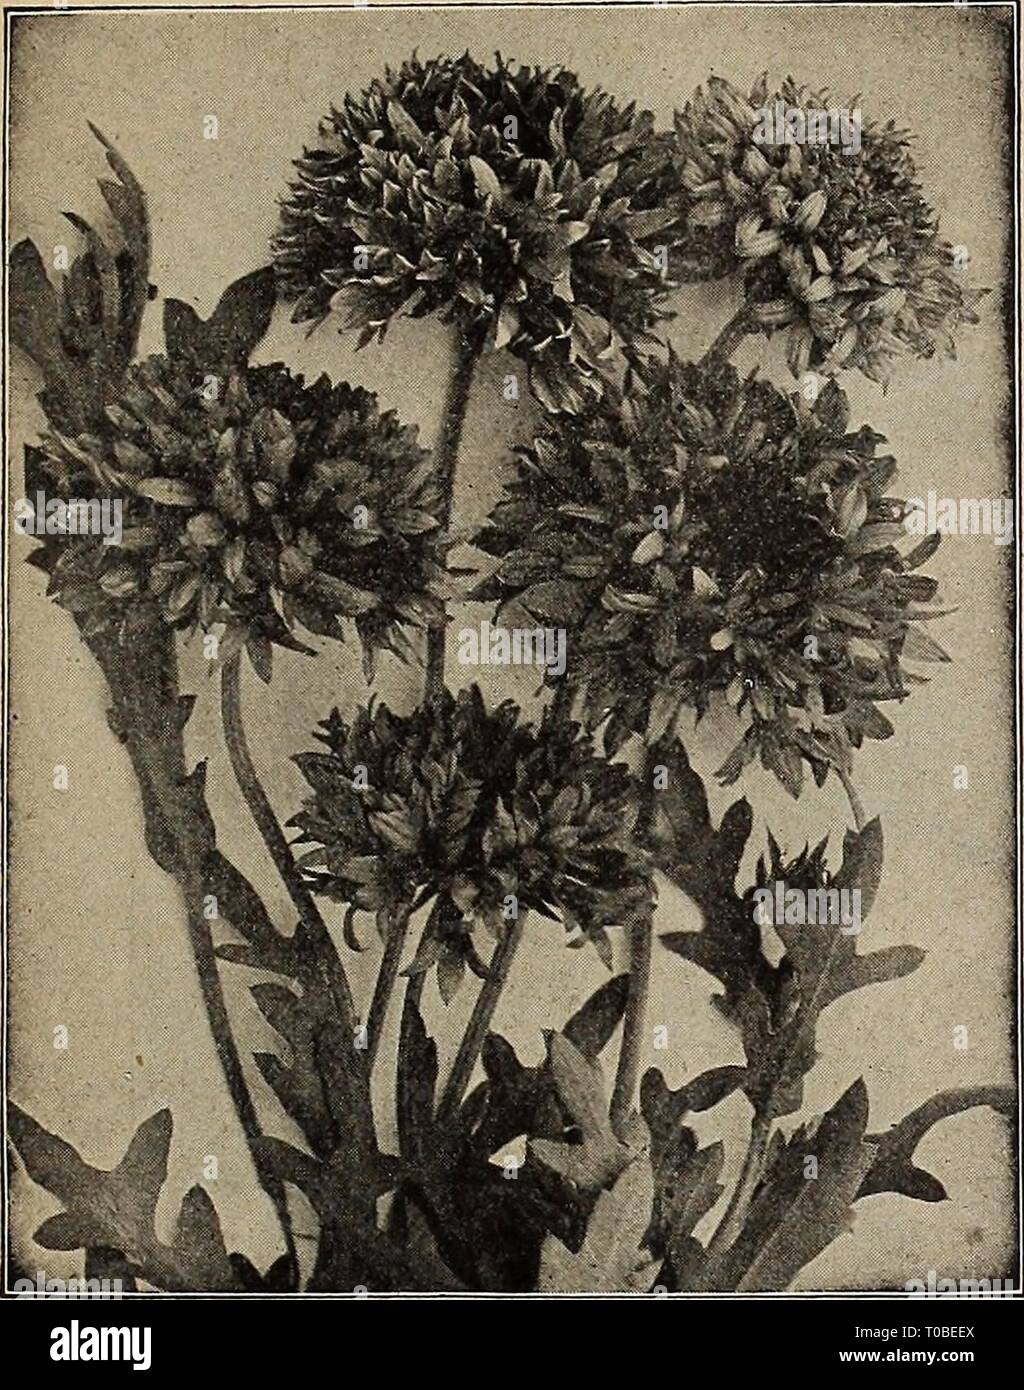 Dreer's garden book 1920 (1920) Dreer's garden book 1920 dreersgardenbook1920henr Year: 1920  KEMRTADREER-PHILADELPHIA-PA REllABlEf LOWER SEEDS 43    Gaillardia Picta Double-flowering PER PKT. EUPATORIUM (Thorough Wort) Strong-growing, hardy perennials, well suited for naturalizing, and deserve a place in every hardy border; they will grow and thrive in almost any situation; will flower the first year if sown 2530 early. 2442 Ageratoides. A very useful variety, growing 3 to 4 feet high, with dense heads of minute white flowers from August to October 10 2443 Coelestinum. One of the best blue pe Stock Photo